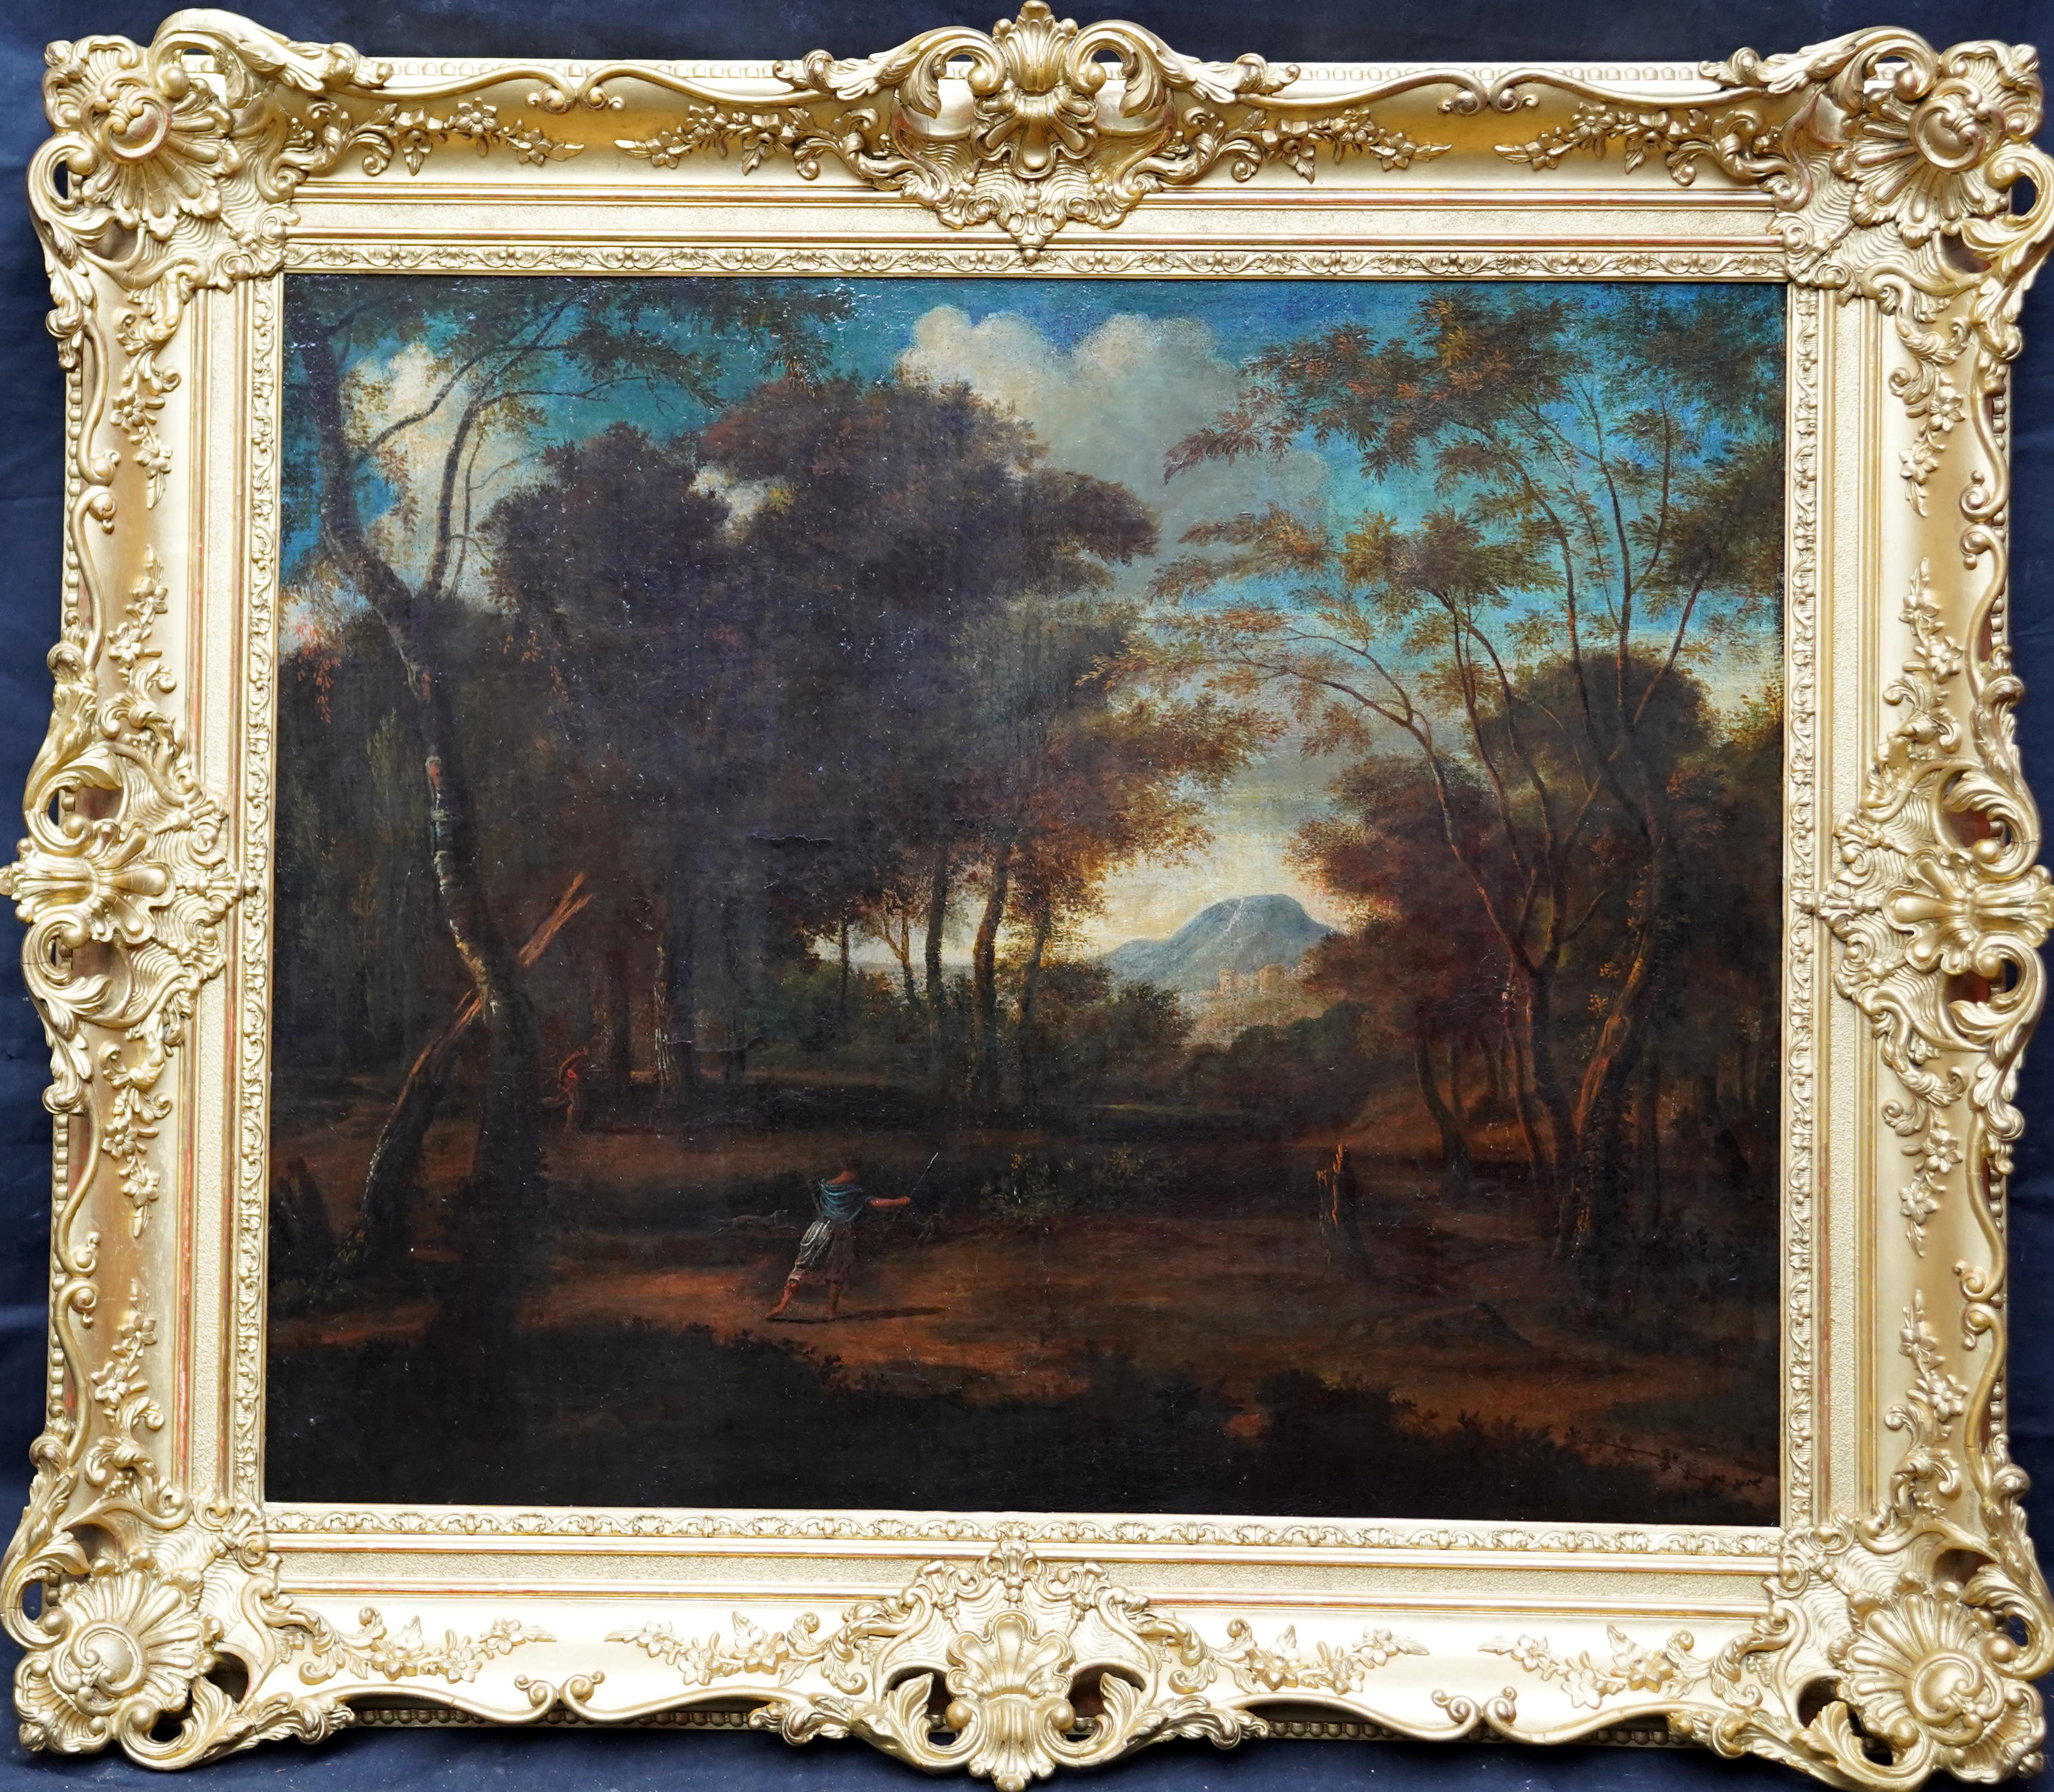 Jean François Millet Landscape Painting - Wooded Landscape with Diana Hunting - 17thC Old Master French art oil painting